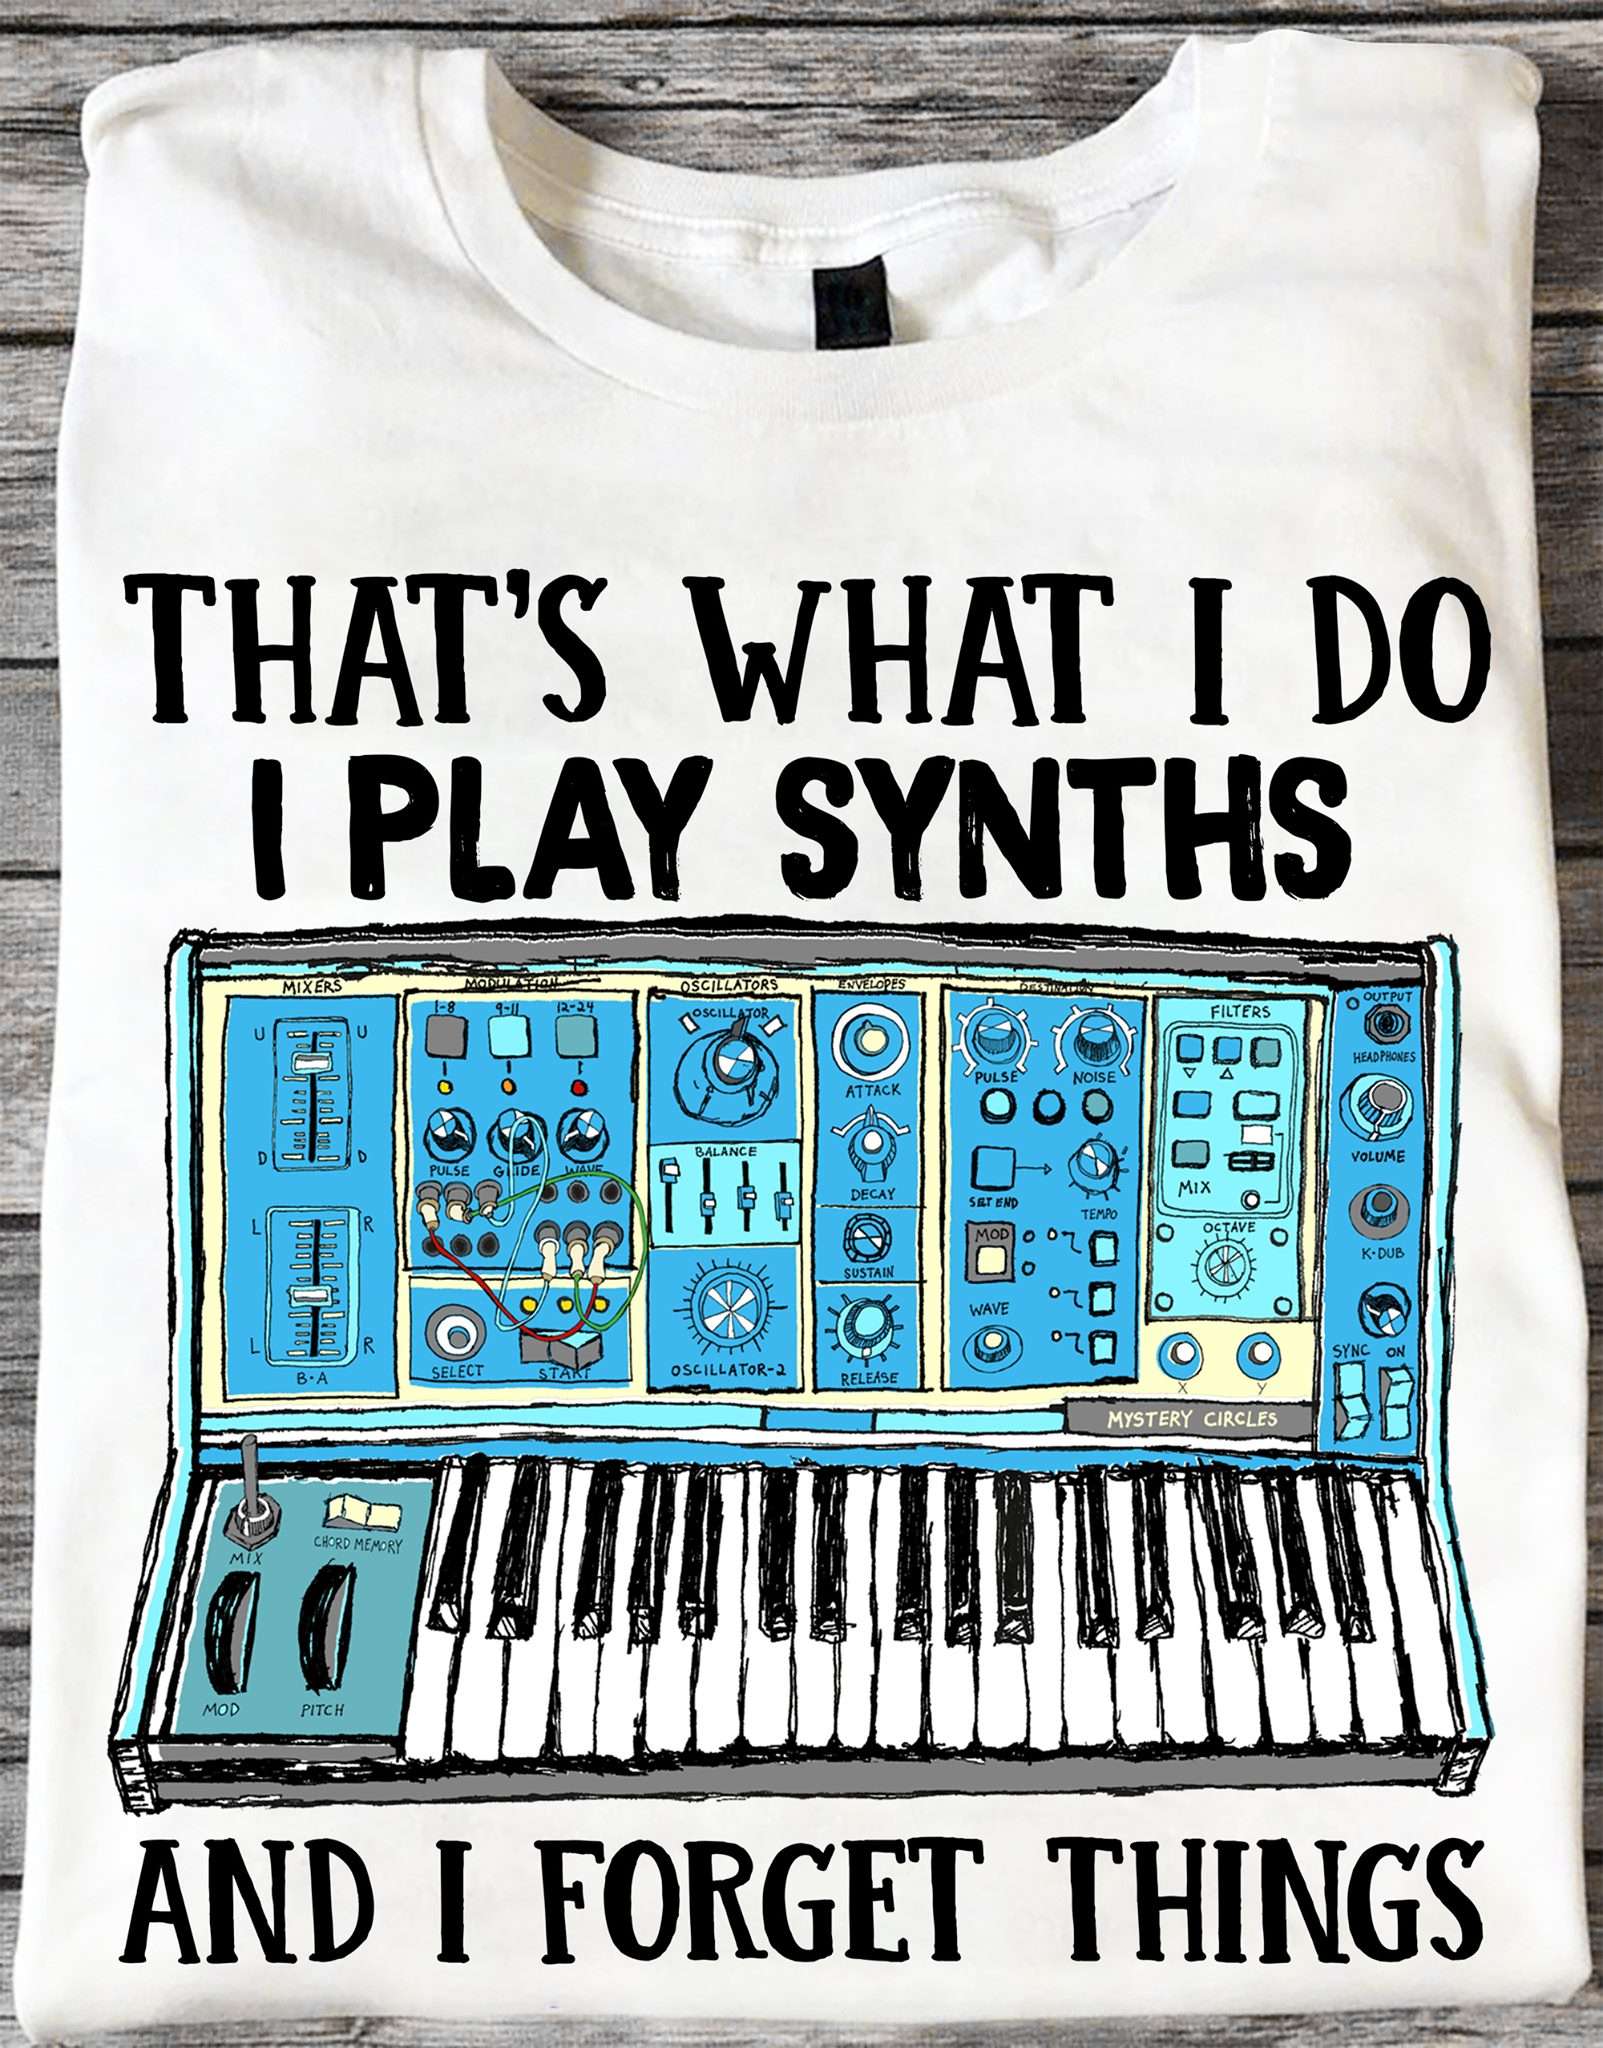 Synths Player - That's what i do i play synths and i forget things